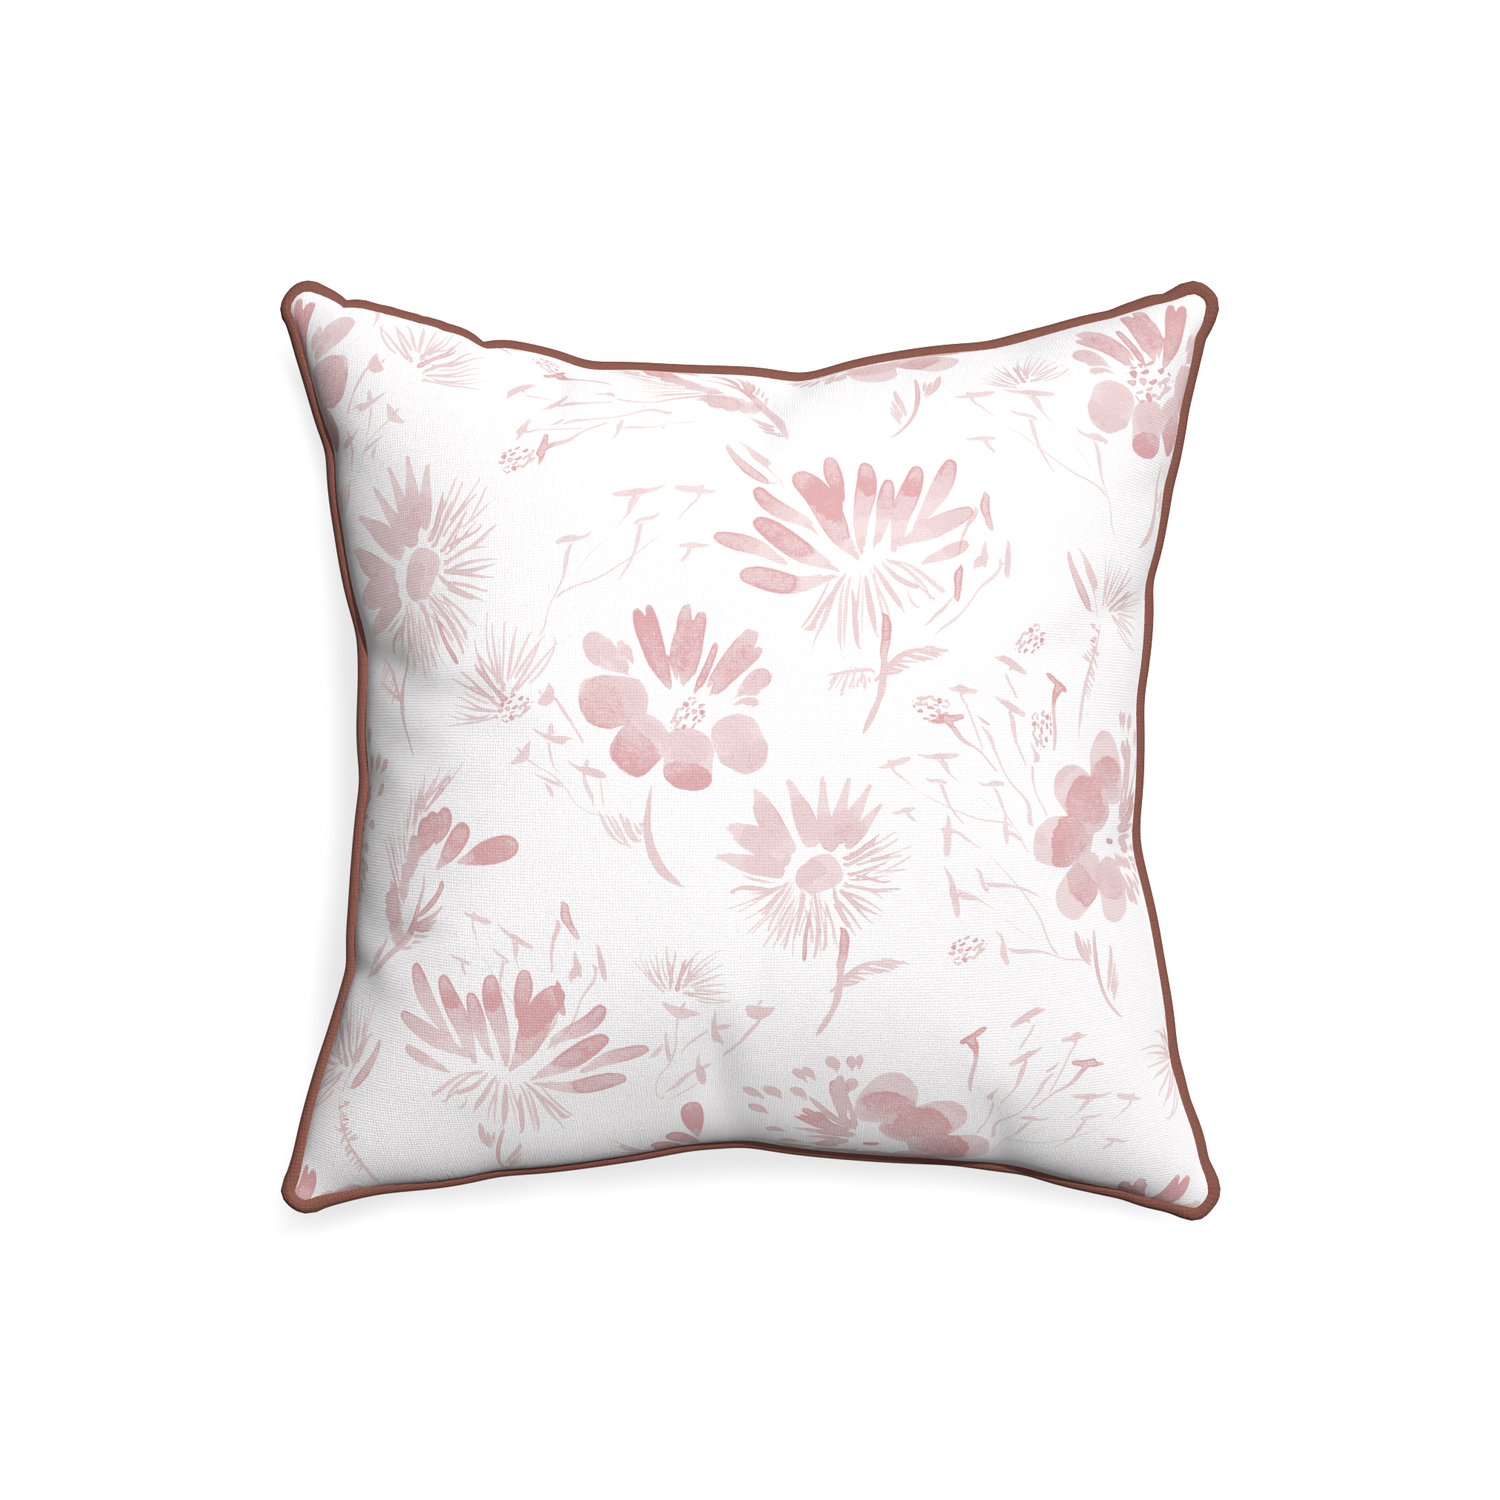 20-square blake custom pillow with w piping on white background